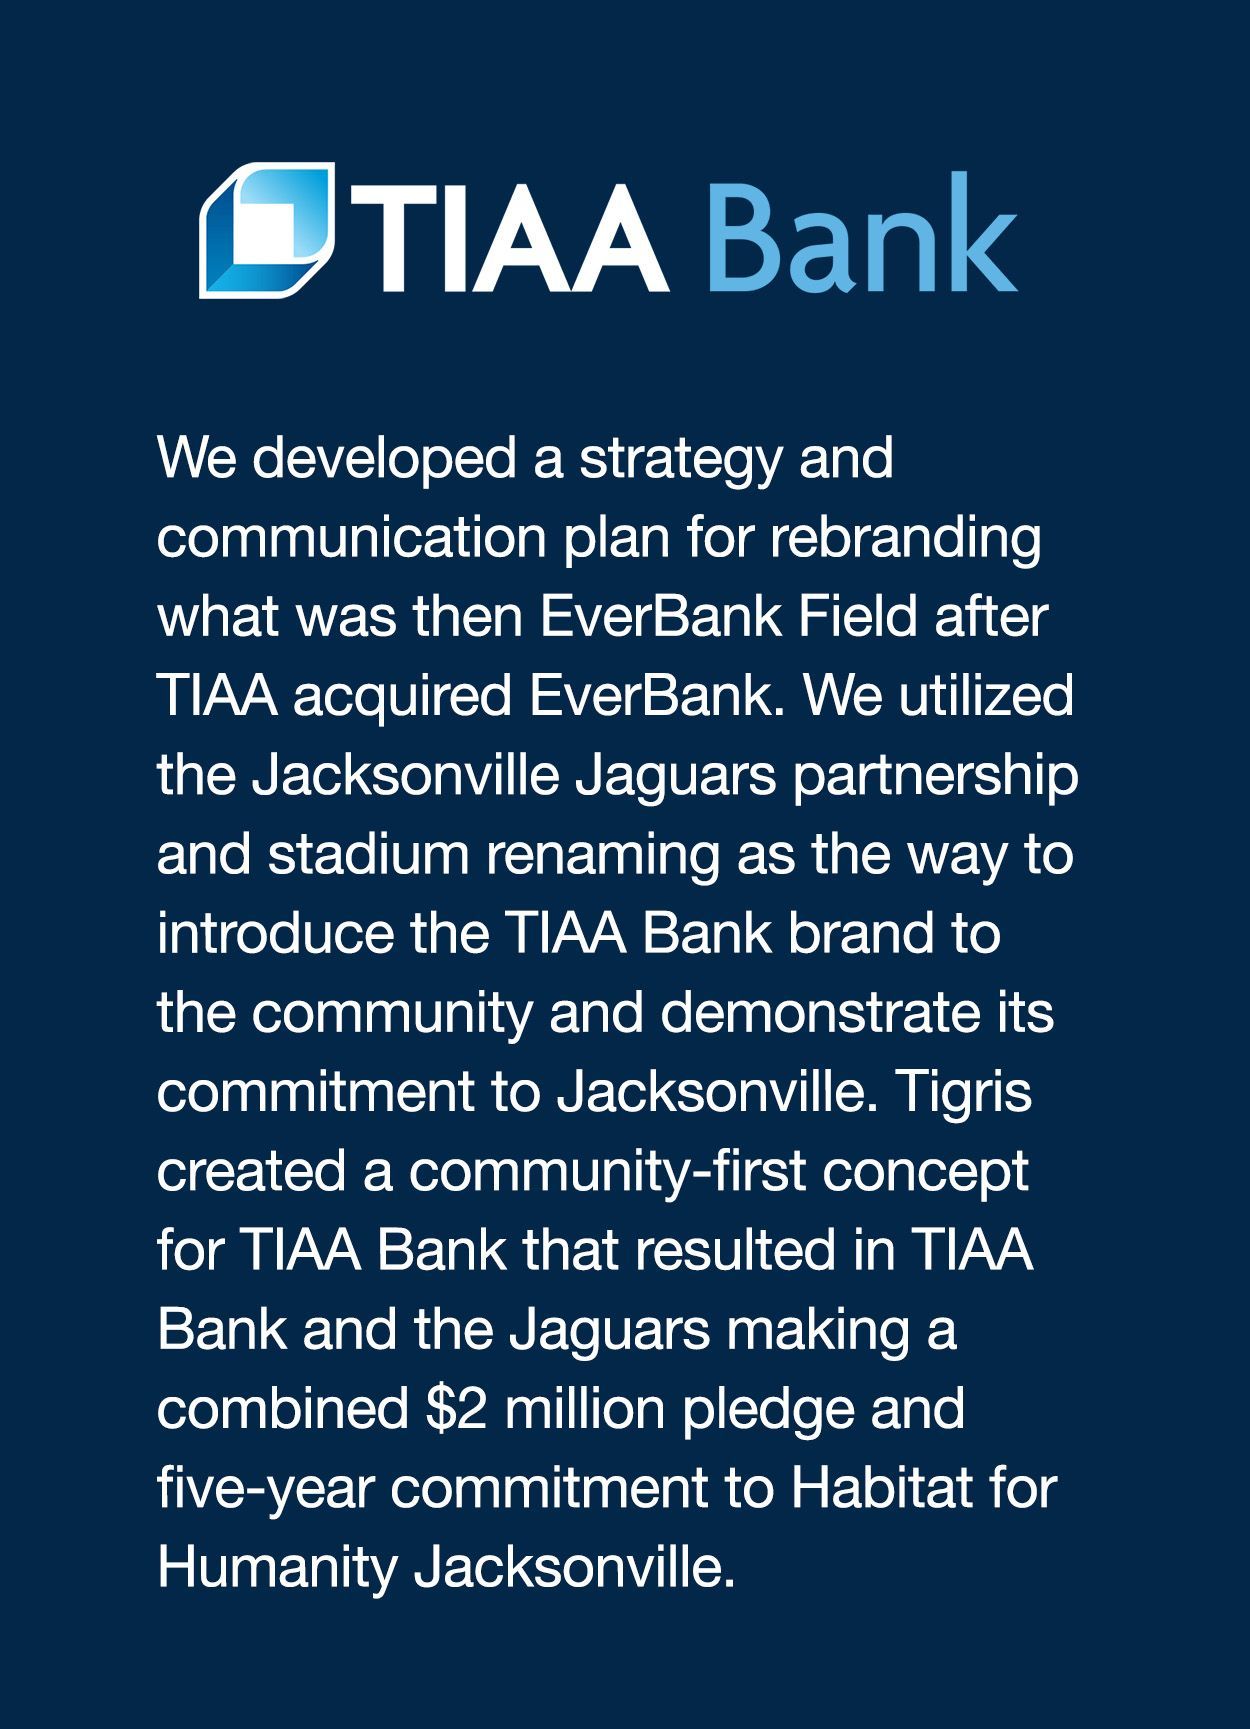 We developed a strategy and communication plan for rebranding what was then EverBank Field after TIAA acquired EverBank. We utilized the Jacksonville Jaguars partnership and stadium renaming as the way to introduce the TIAA Bank brand to the community and demonstrate its commitment to Jacksonville. Tigris created a community-first concept for TIAA Bank that resulted in TIAA Bank and the Jaguars making a combined $2 million pledge and five-year commitment to Habitat for Humanity Jacksonville.